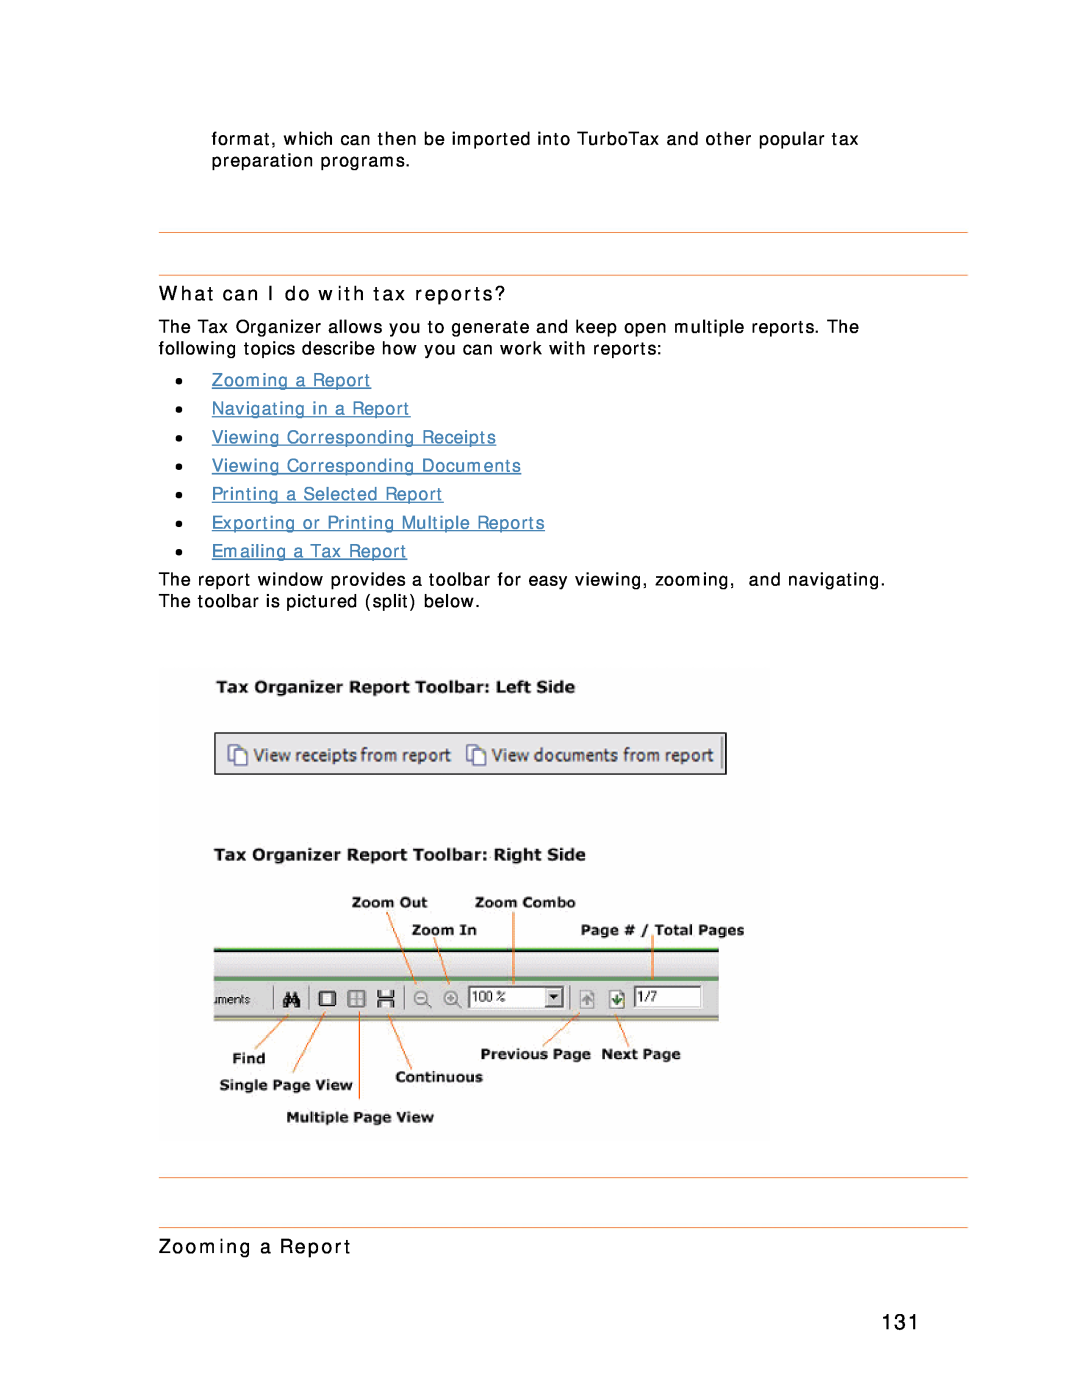 Univex NeatDesk manual What can I do with tax reports?, Zooming a Report Navigating in a Report, Emailing a Tax Report 